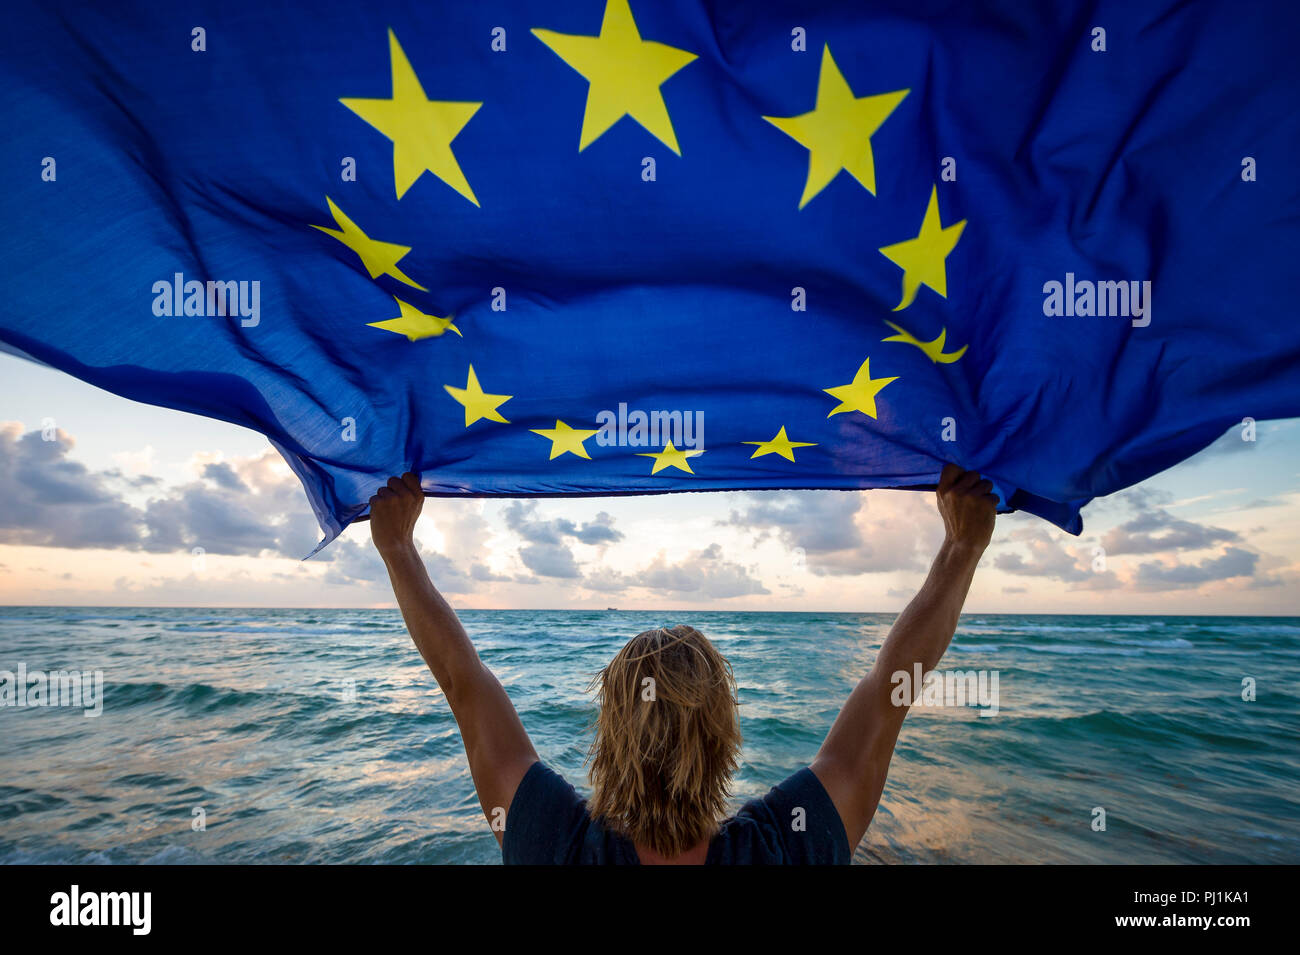 Man holding a fluttering iconic EU flag with circle of stars on beach at sunrise Stock Photo